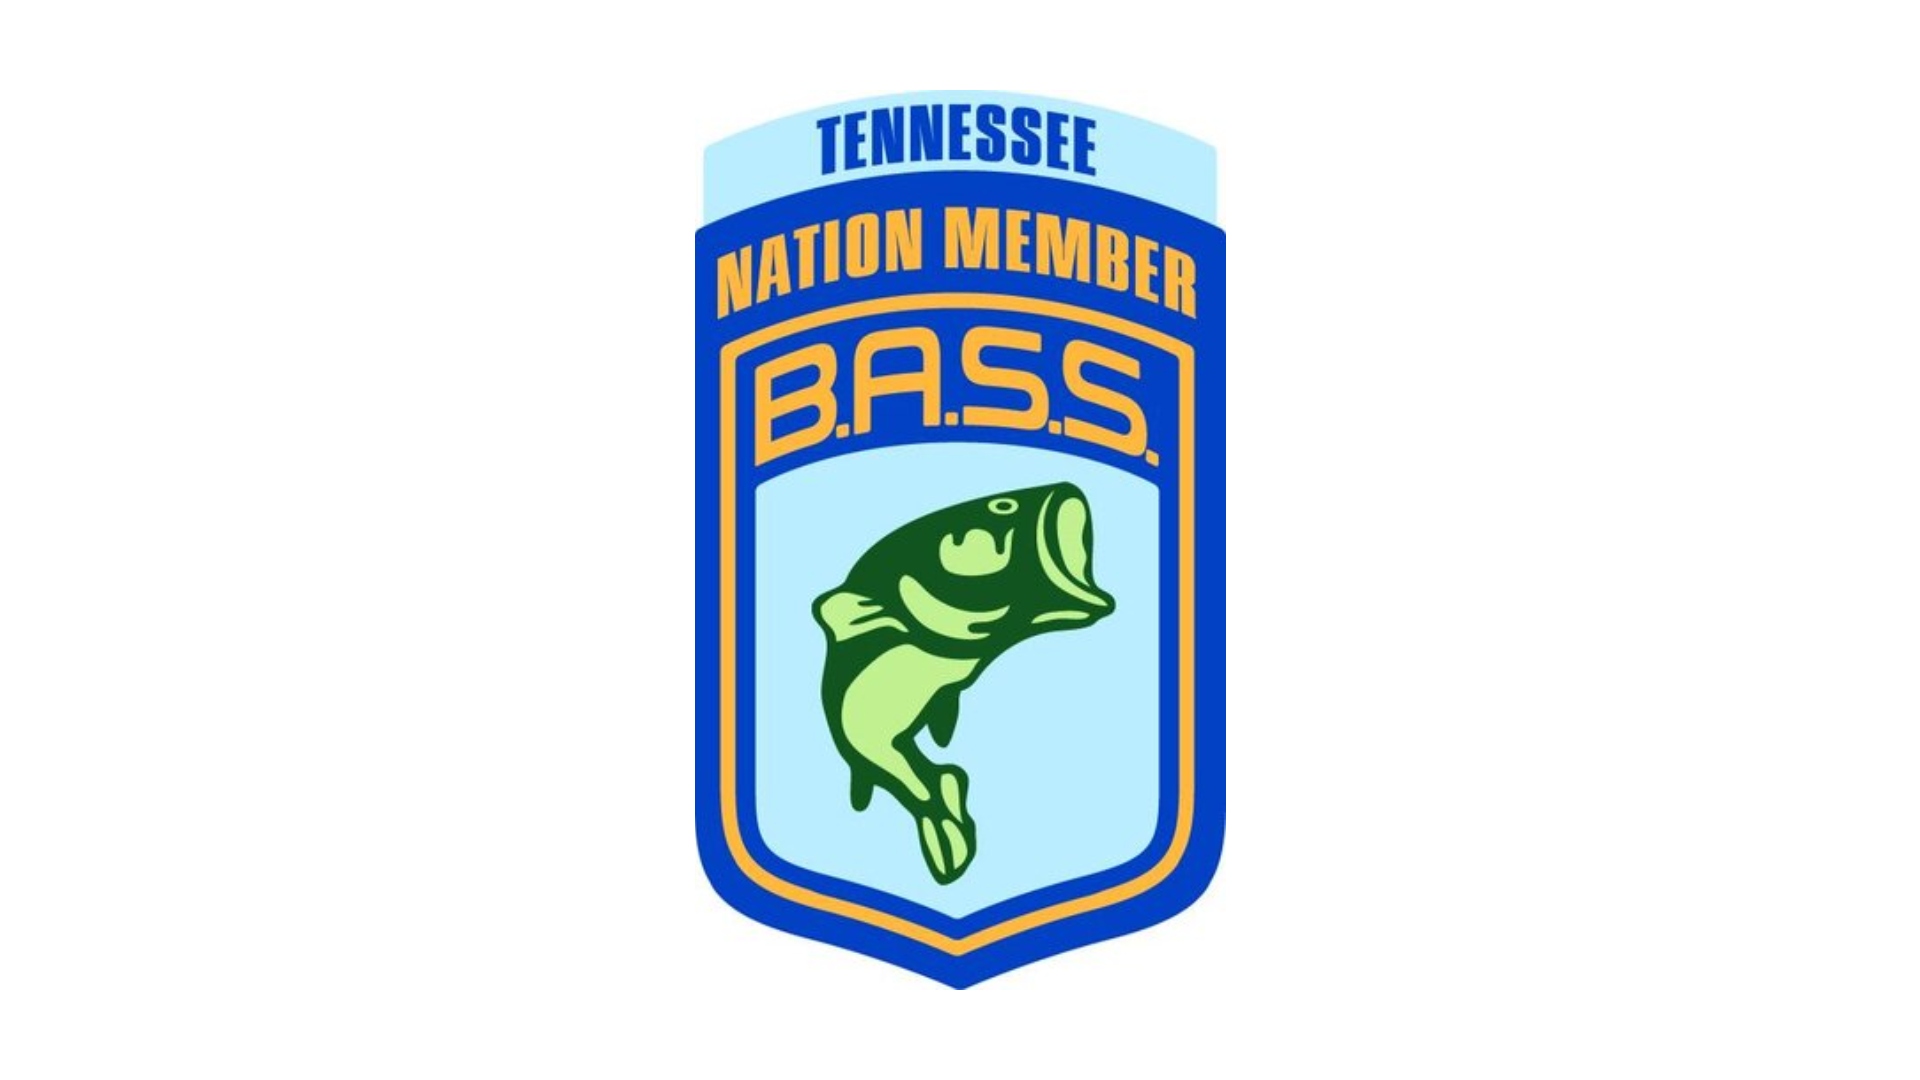 Tennessee BASS Nation Logo with a bass and the words Tennessee Nation Member B.A.S.S.